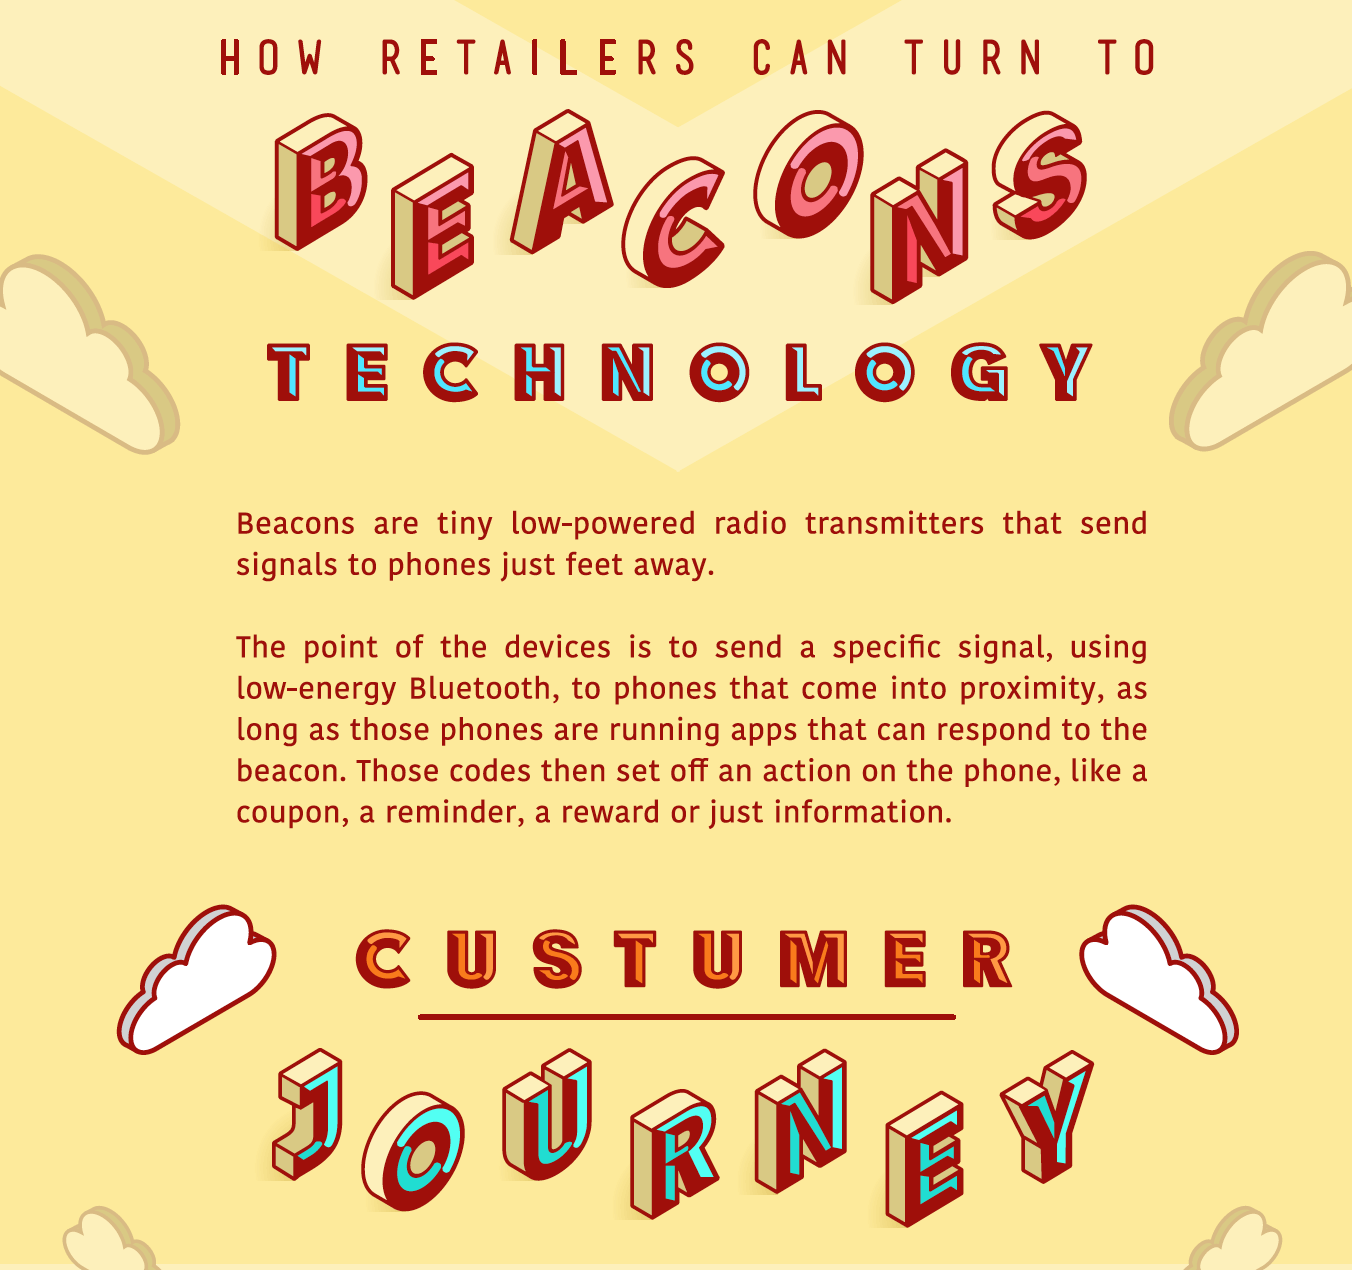 Infographic_How retailers can turn to beacons_EN.png